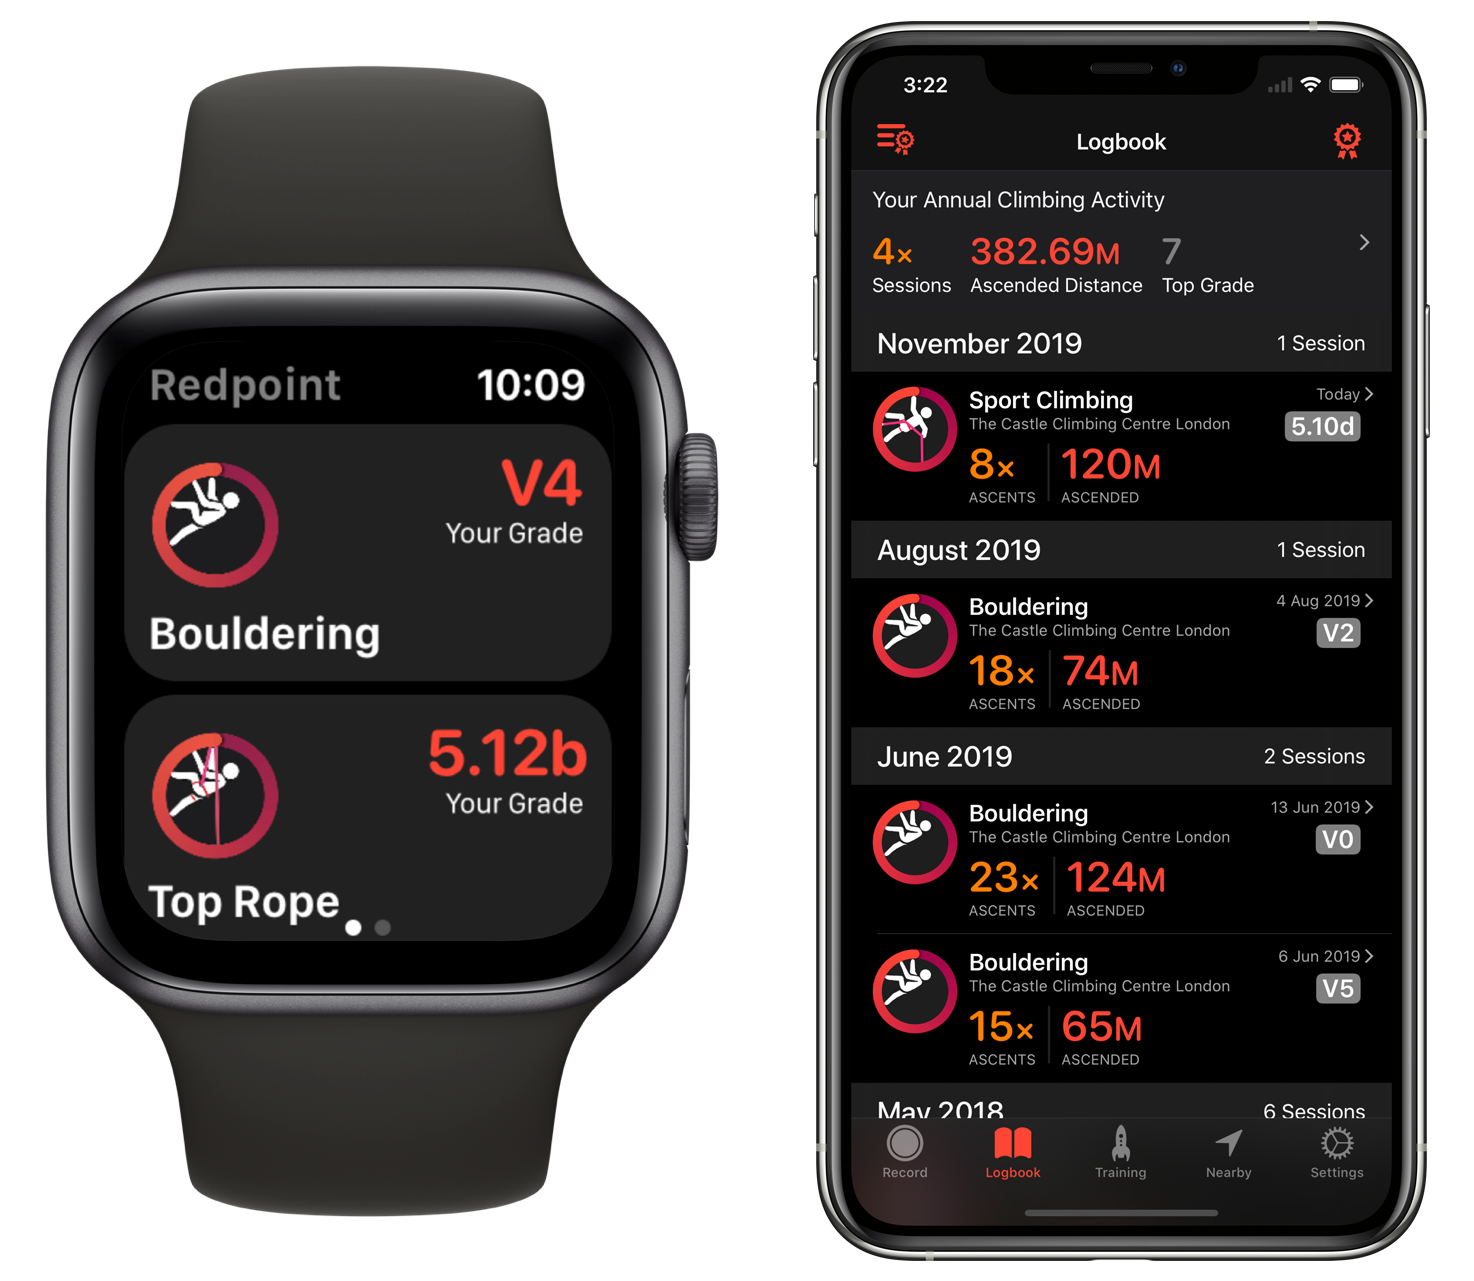 Enlarged view: Screenshot of the climbing app Redpoint on the Apple Watch and on a smartphone